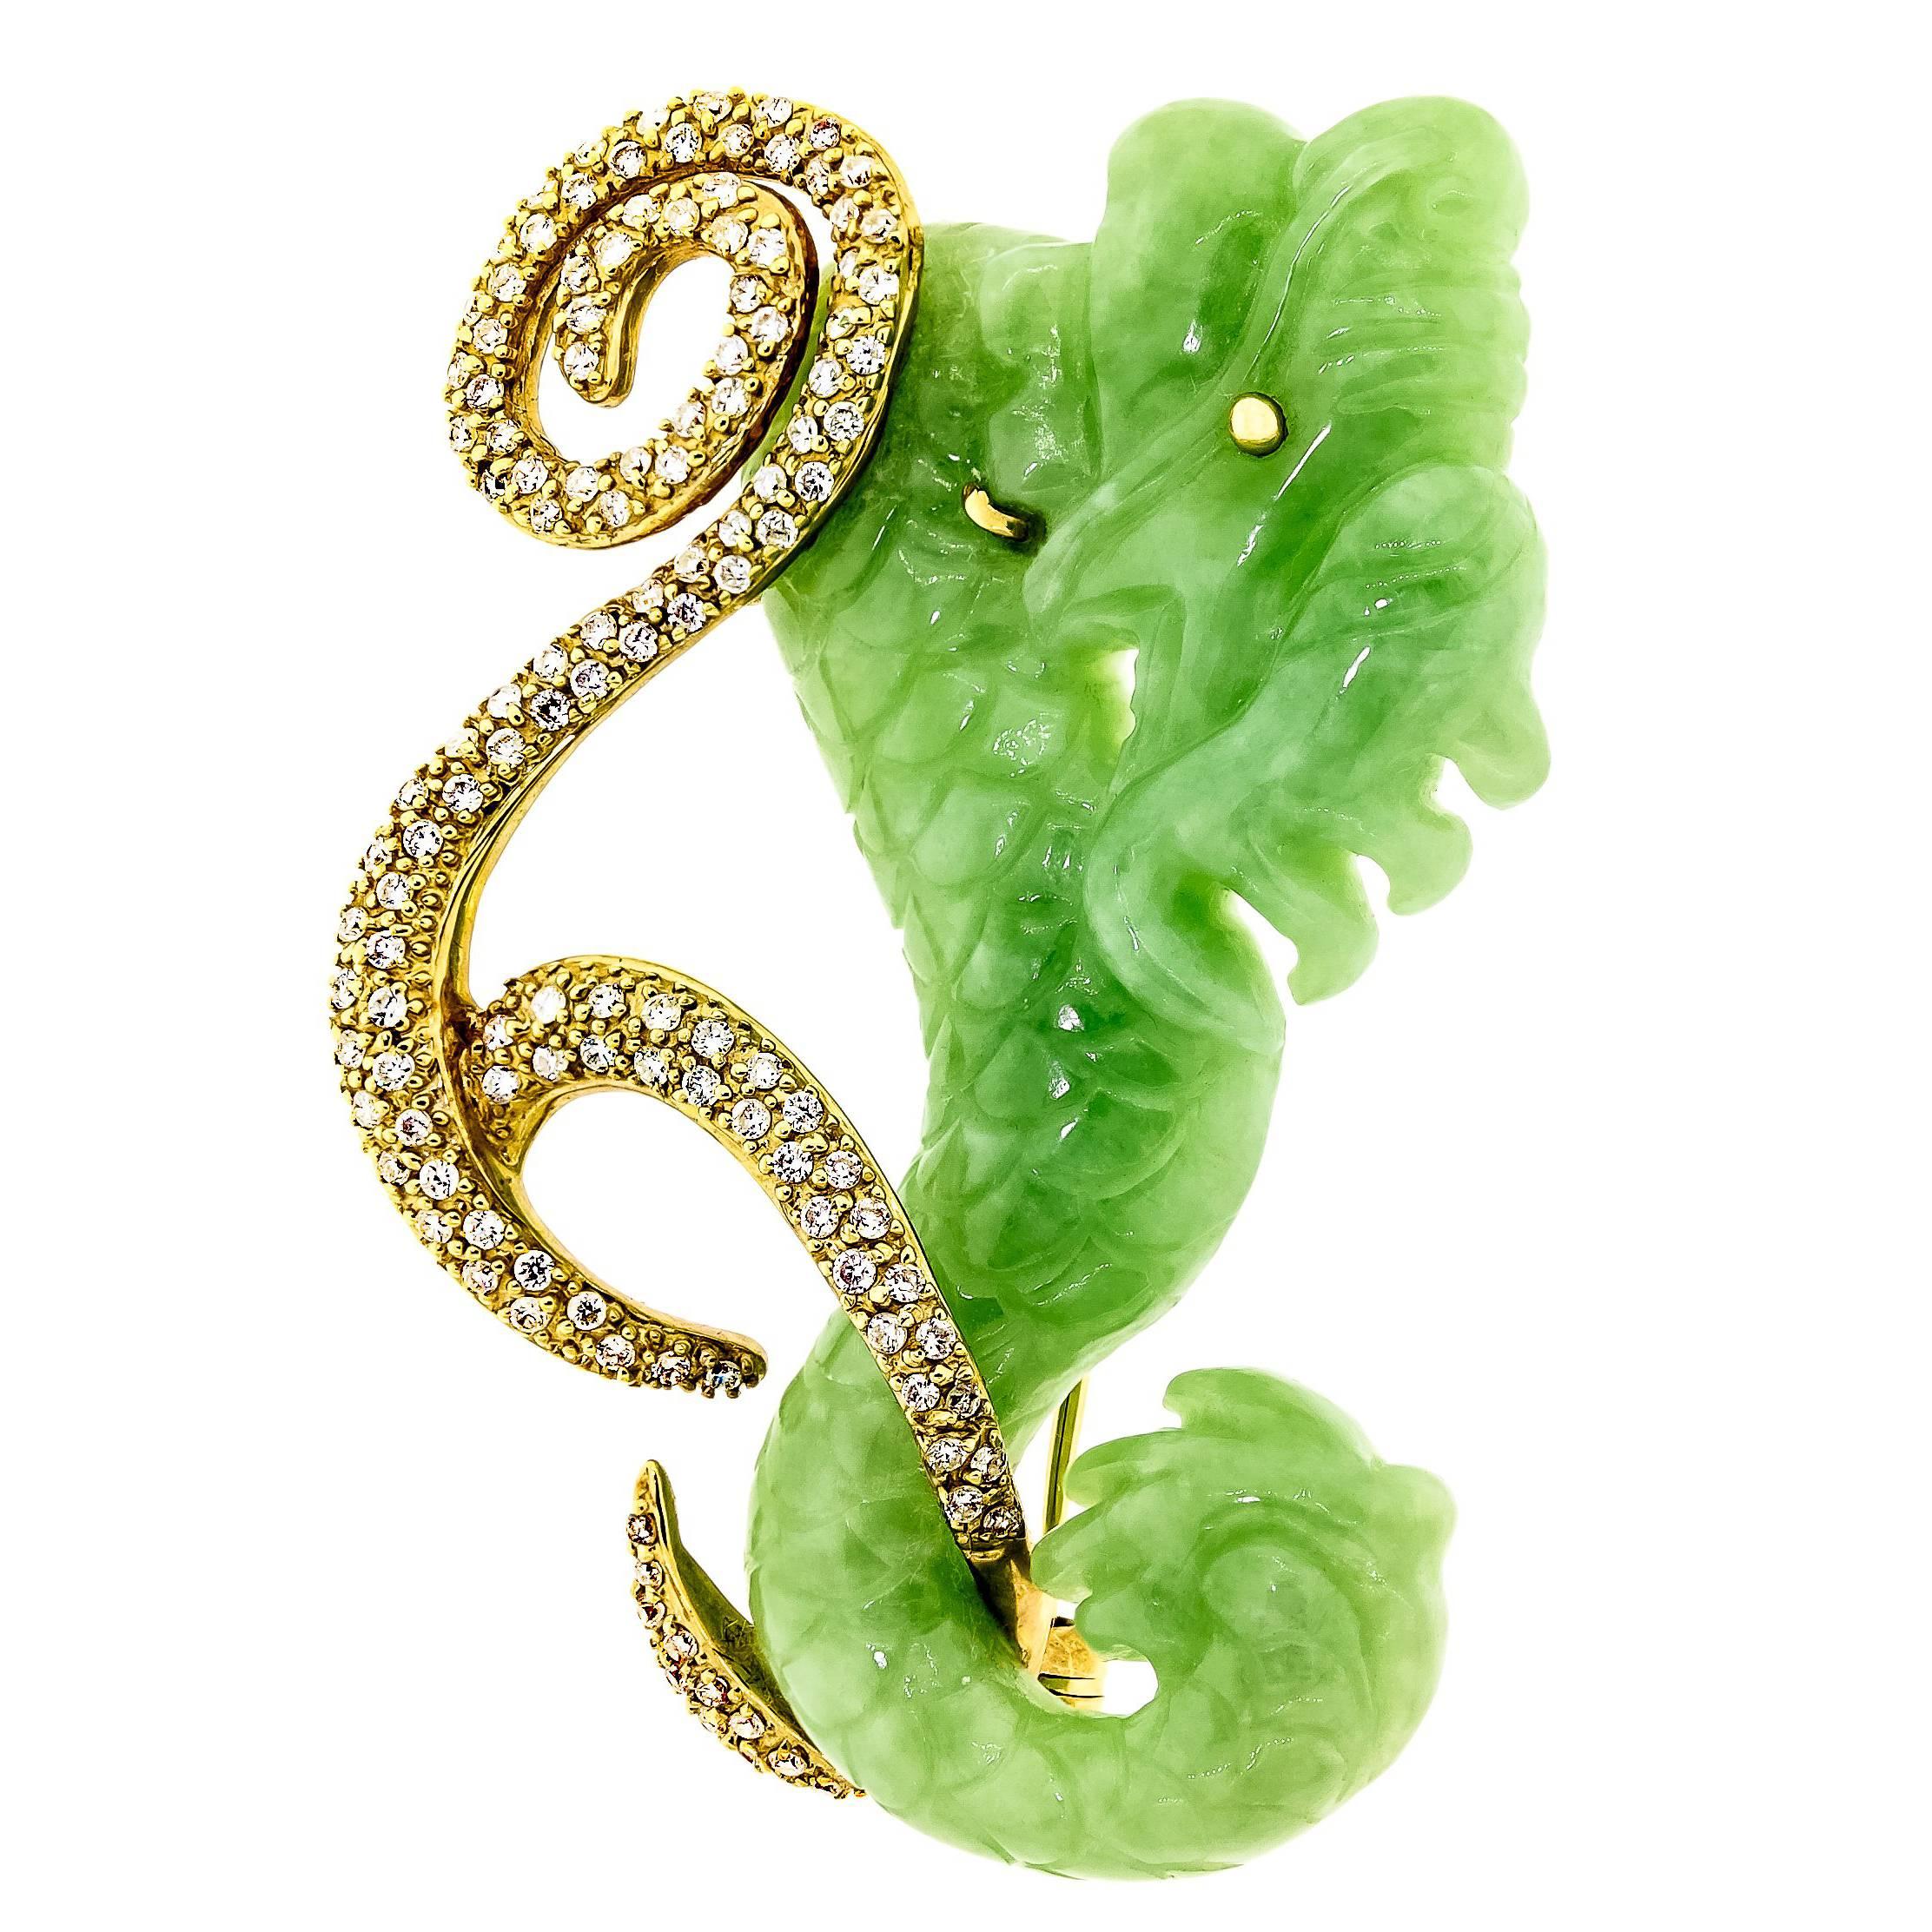 Vintage 14kt yellow gold jade and diamond dragon brooch consisting of a carved jade dragon with gold diamond set scrollwork containing 132 round brilliant cut diamonds H-1 color, SI1 clarity weighing approximately 0.39 cts total weight. Stamp: 14k